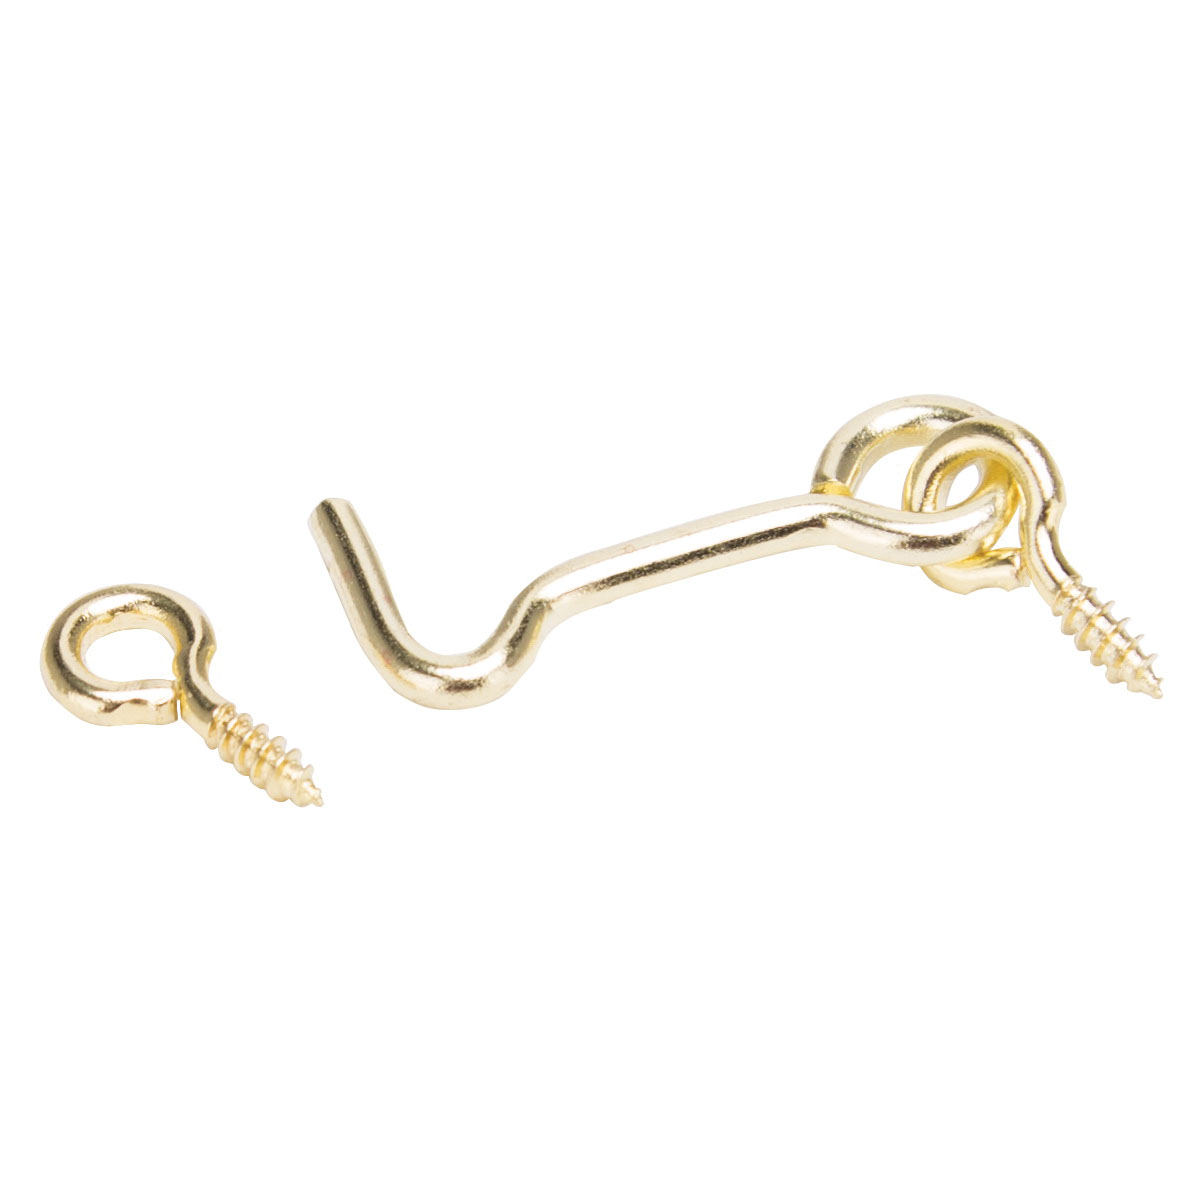 Gate Hook and Eye, 1/8 in Dia Wire, 1-1/2 in L, Solid Brass